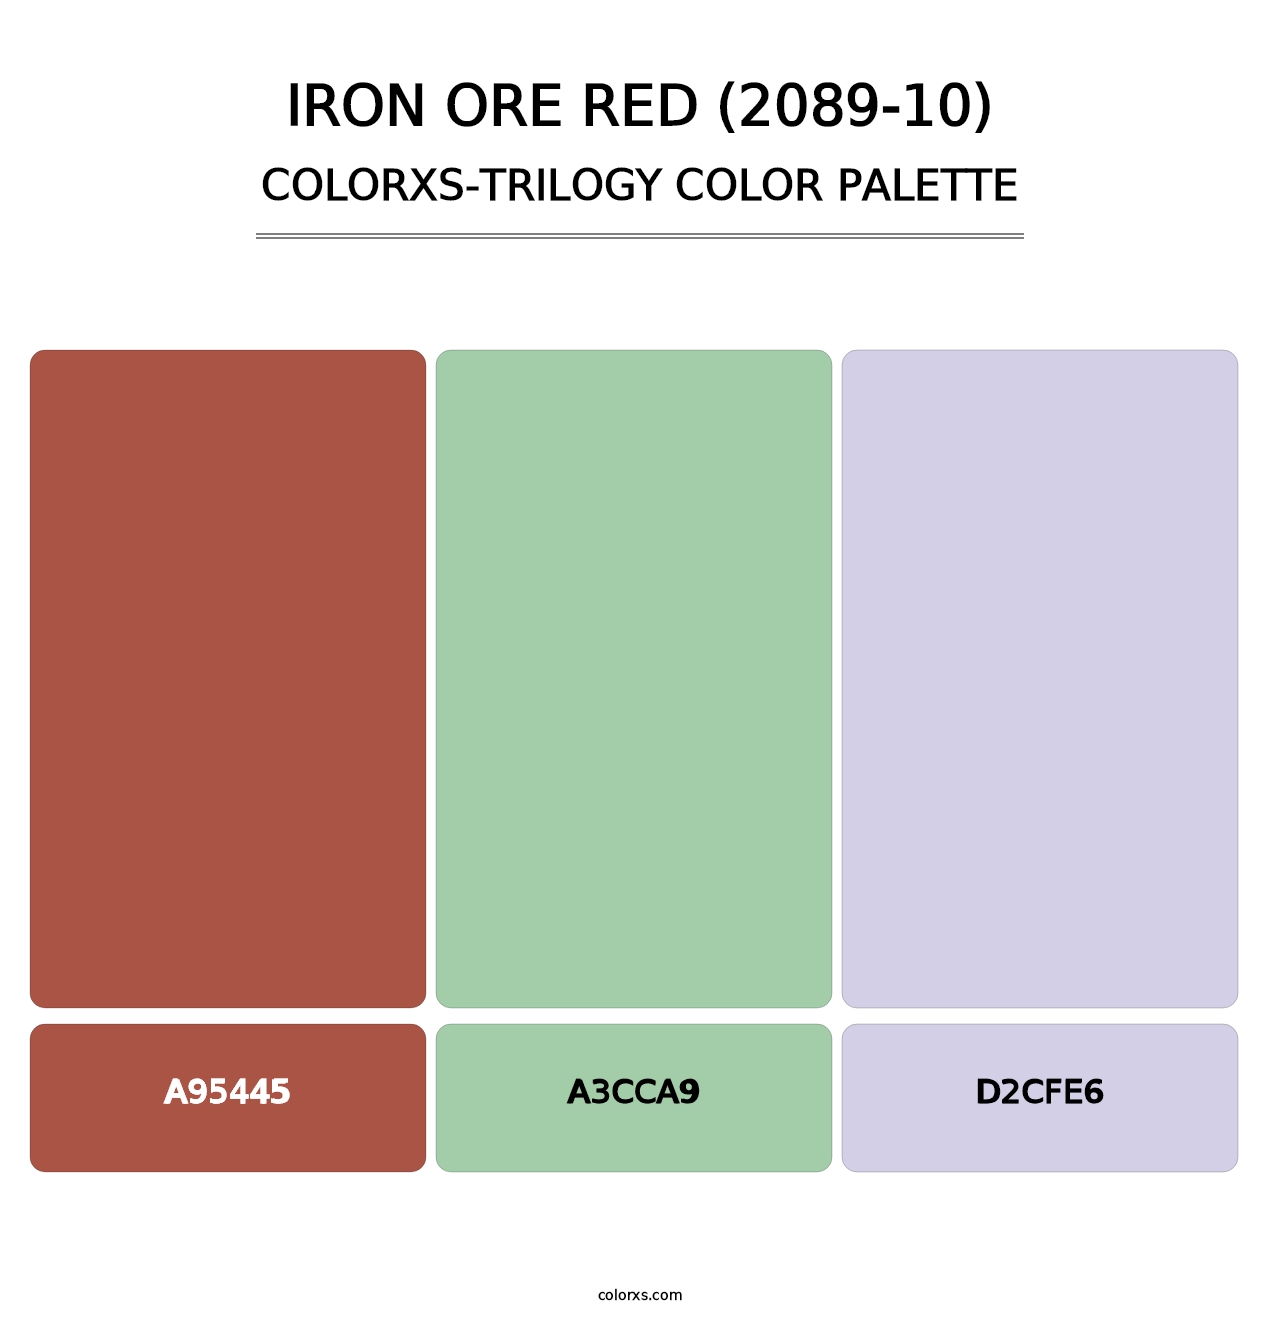 Iron Ore Red (2089-10) - Colorxs Trilogy Palette